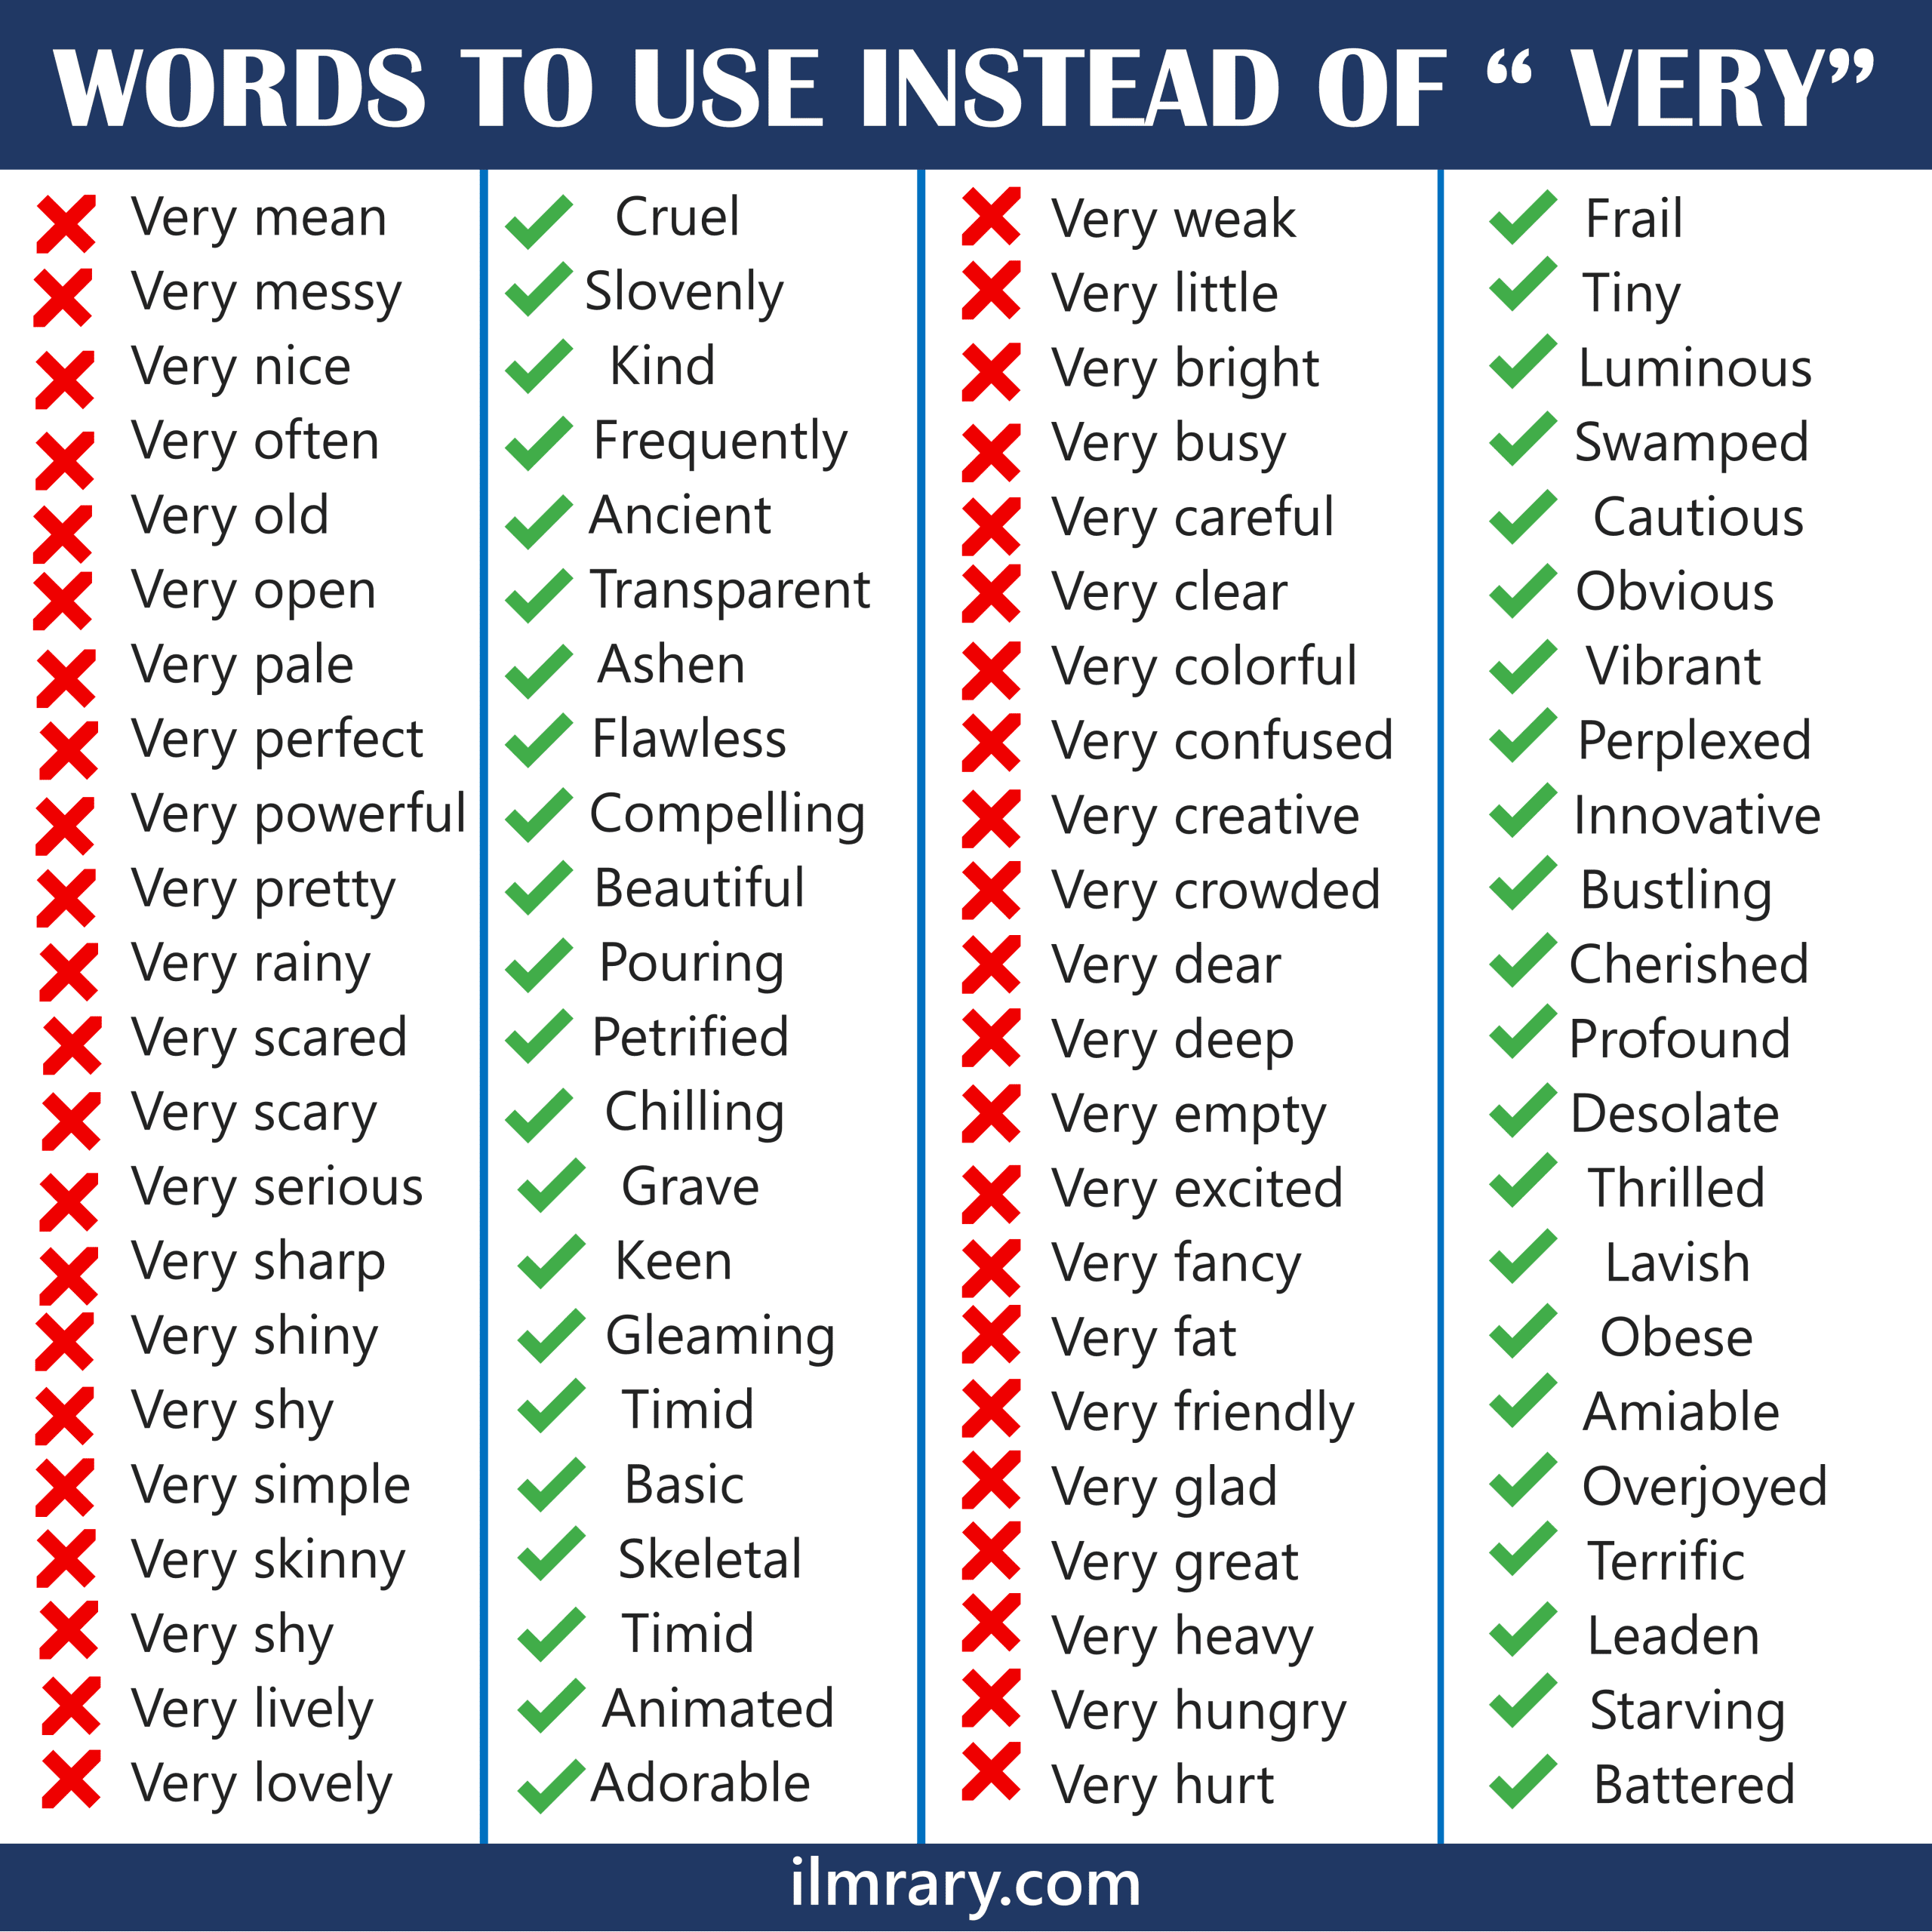 200+ Words To Use Instead of Very in English